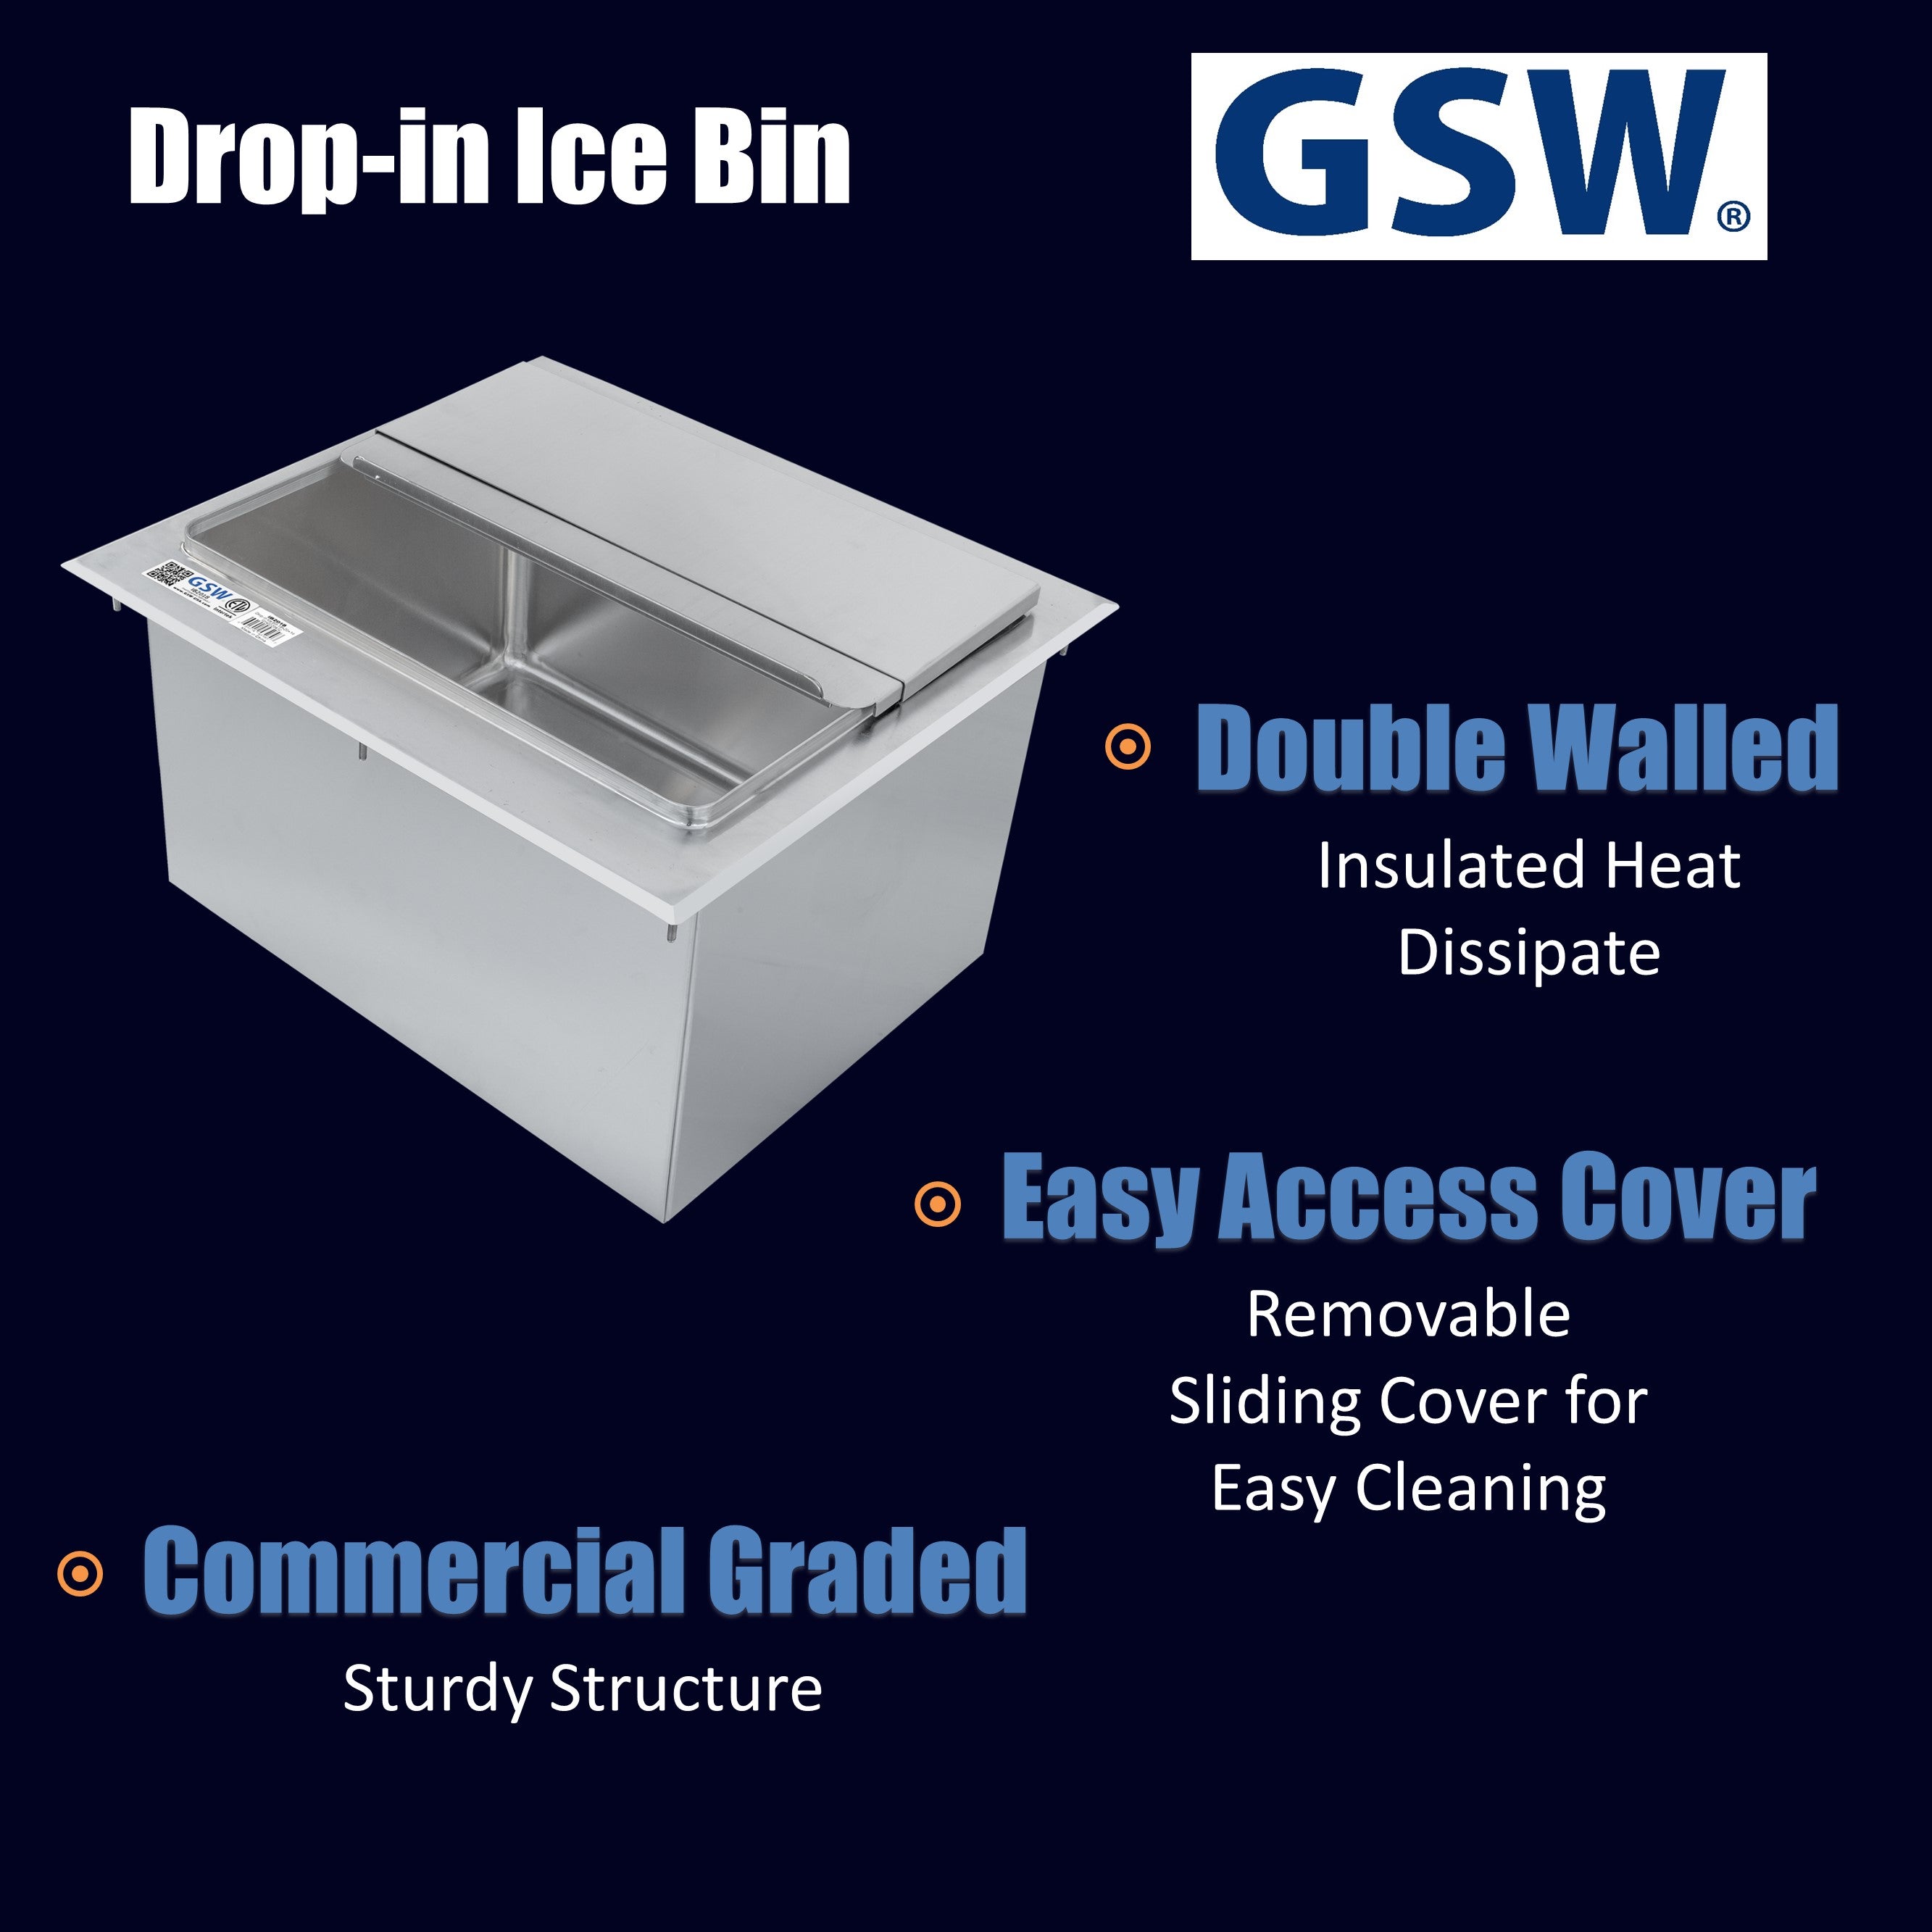 GSW IB2818 Stainless Steel Drop-In Ice Bin 18”D x 28”W x 14”H with Removable Sliding Cover, 9” x 14” Double Walled Ice Bin with 1” NPT Drain, for Storing Ice Cold Wine Beer